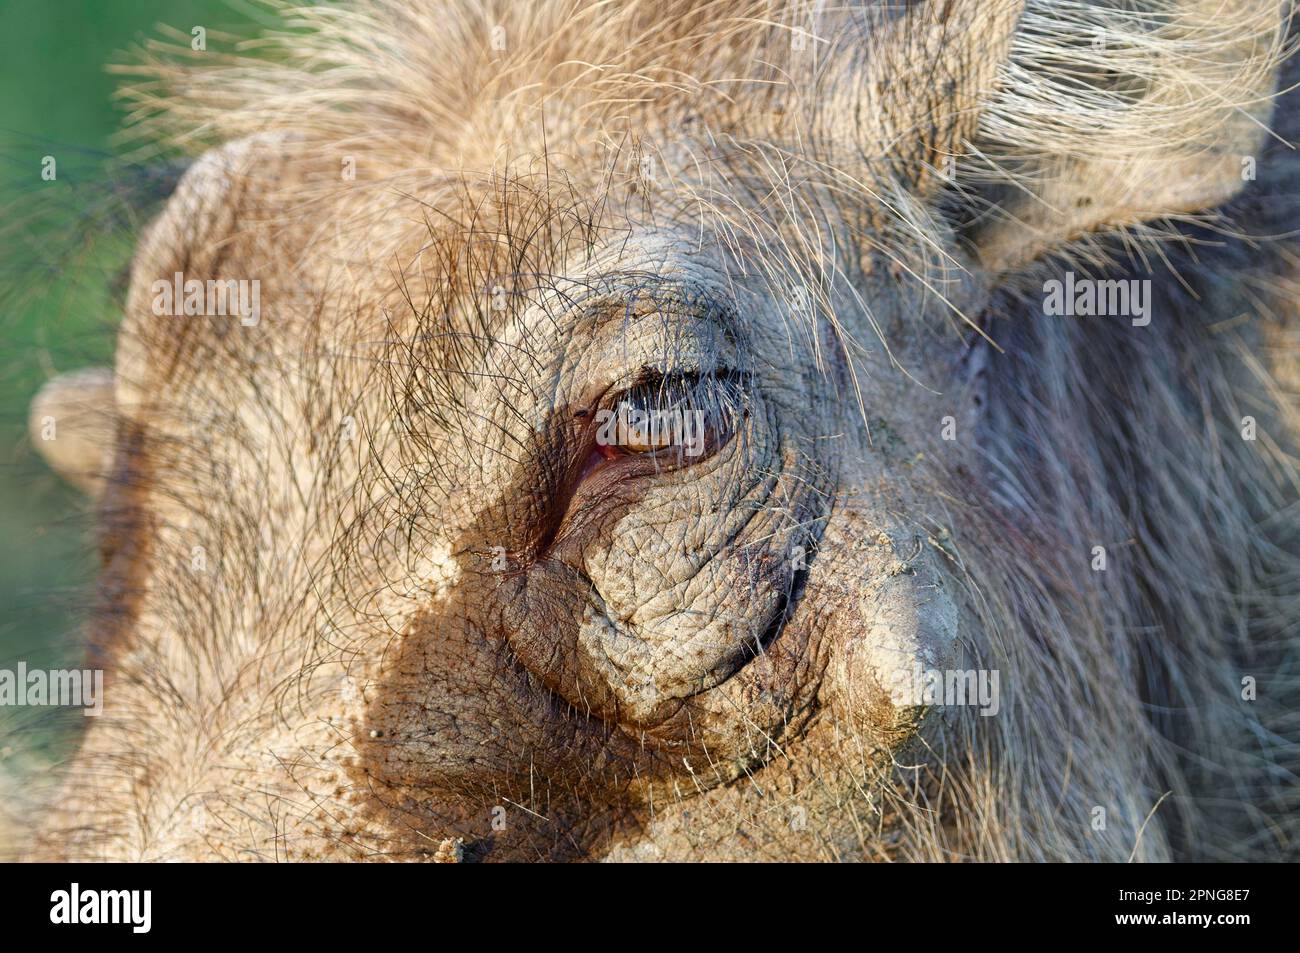 Common warthog (Phacochoerus africanus), adult animal, close-up of the head, eye and skin detail, Addo Elephant National Park, Eastern Cape, South Afr Stock Photo